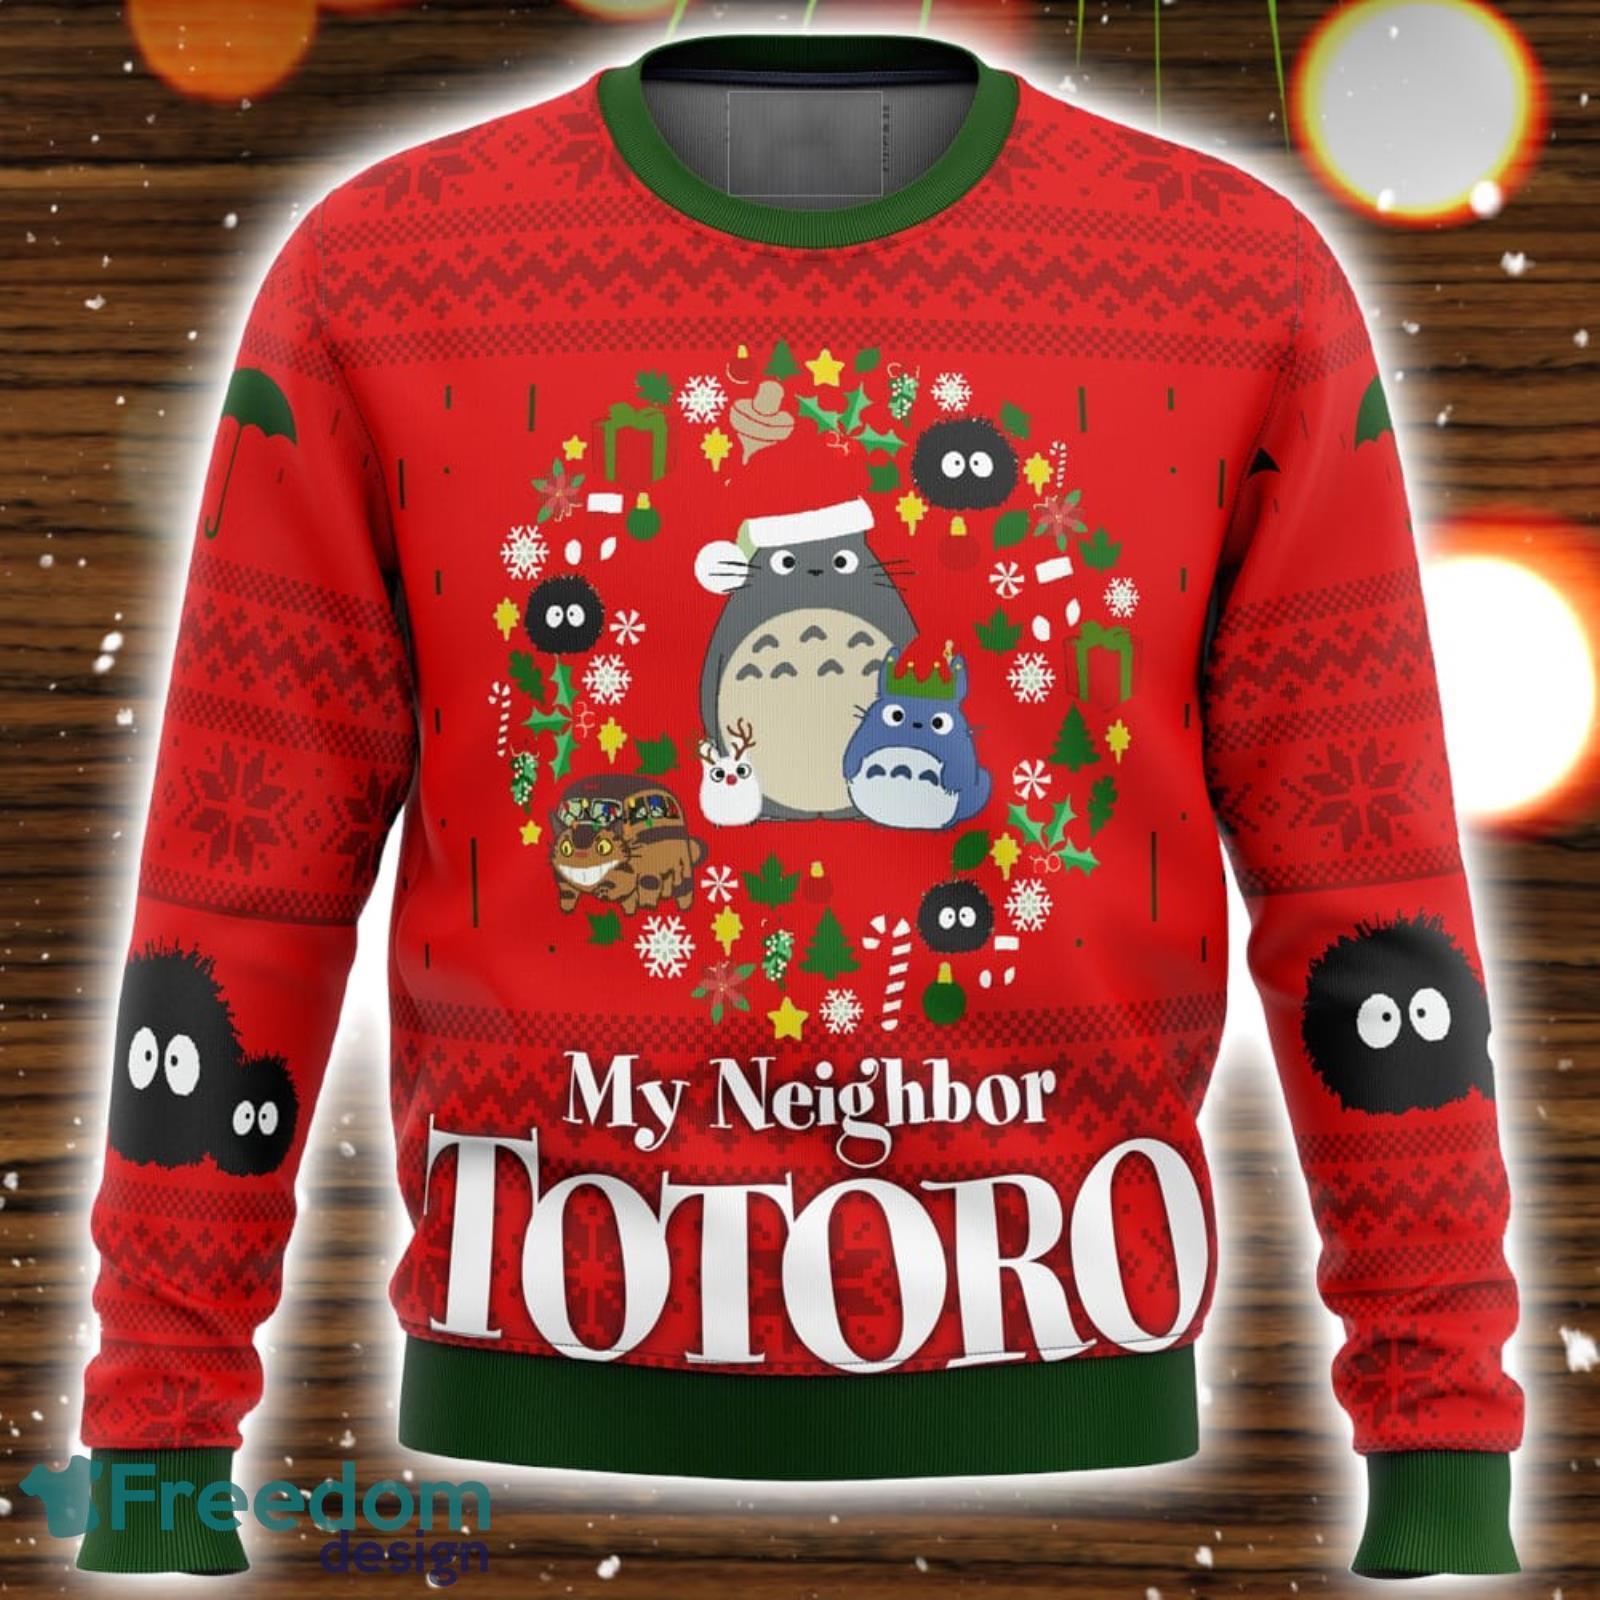 Top 10 Ugly Christmas Sweaters